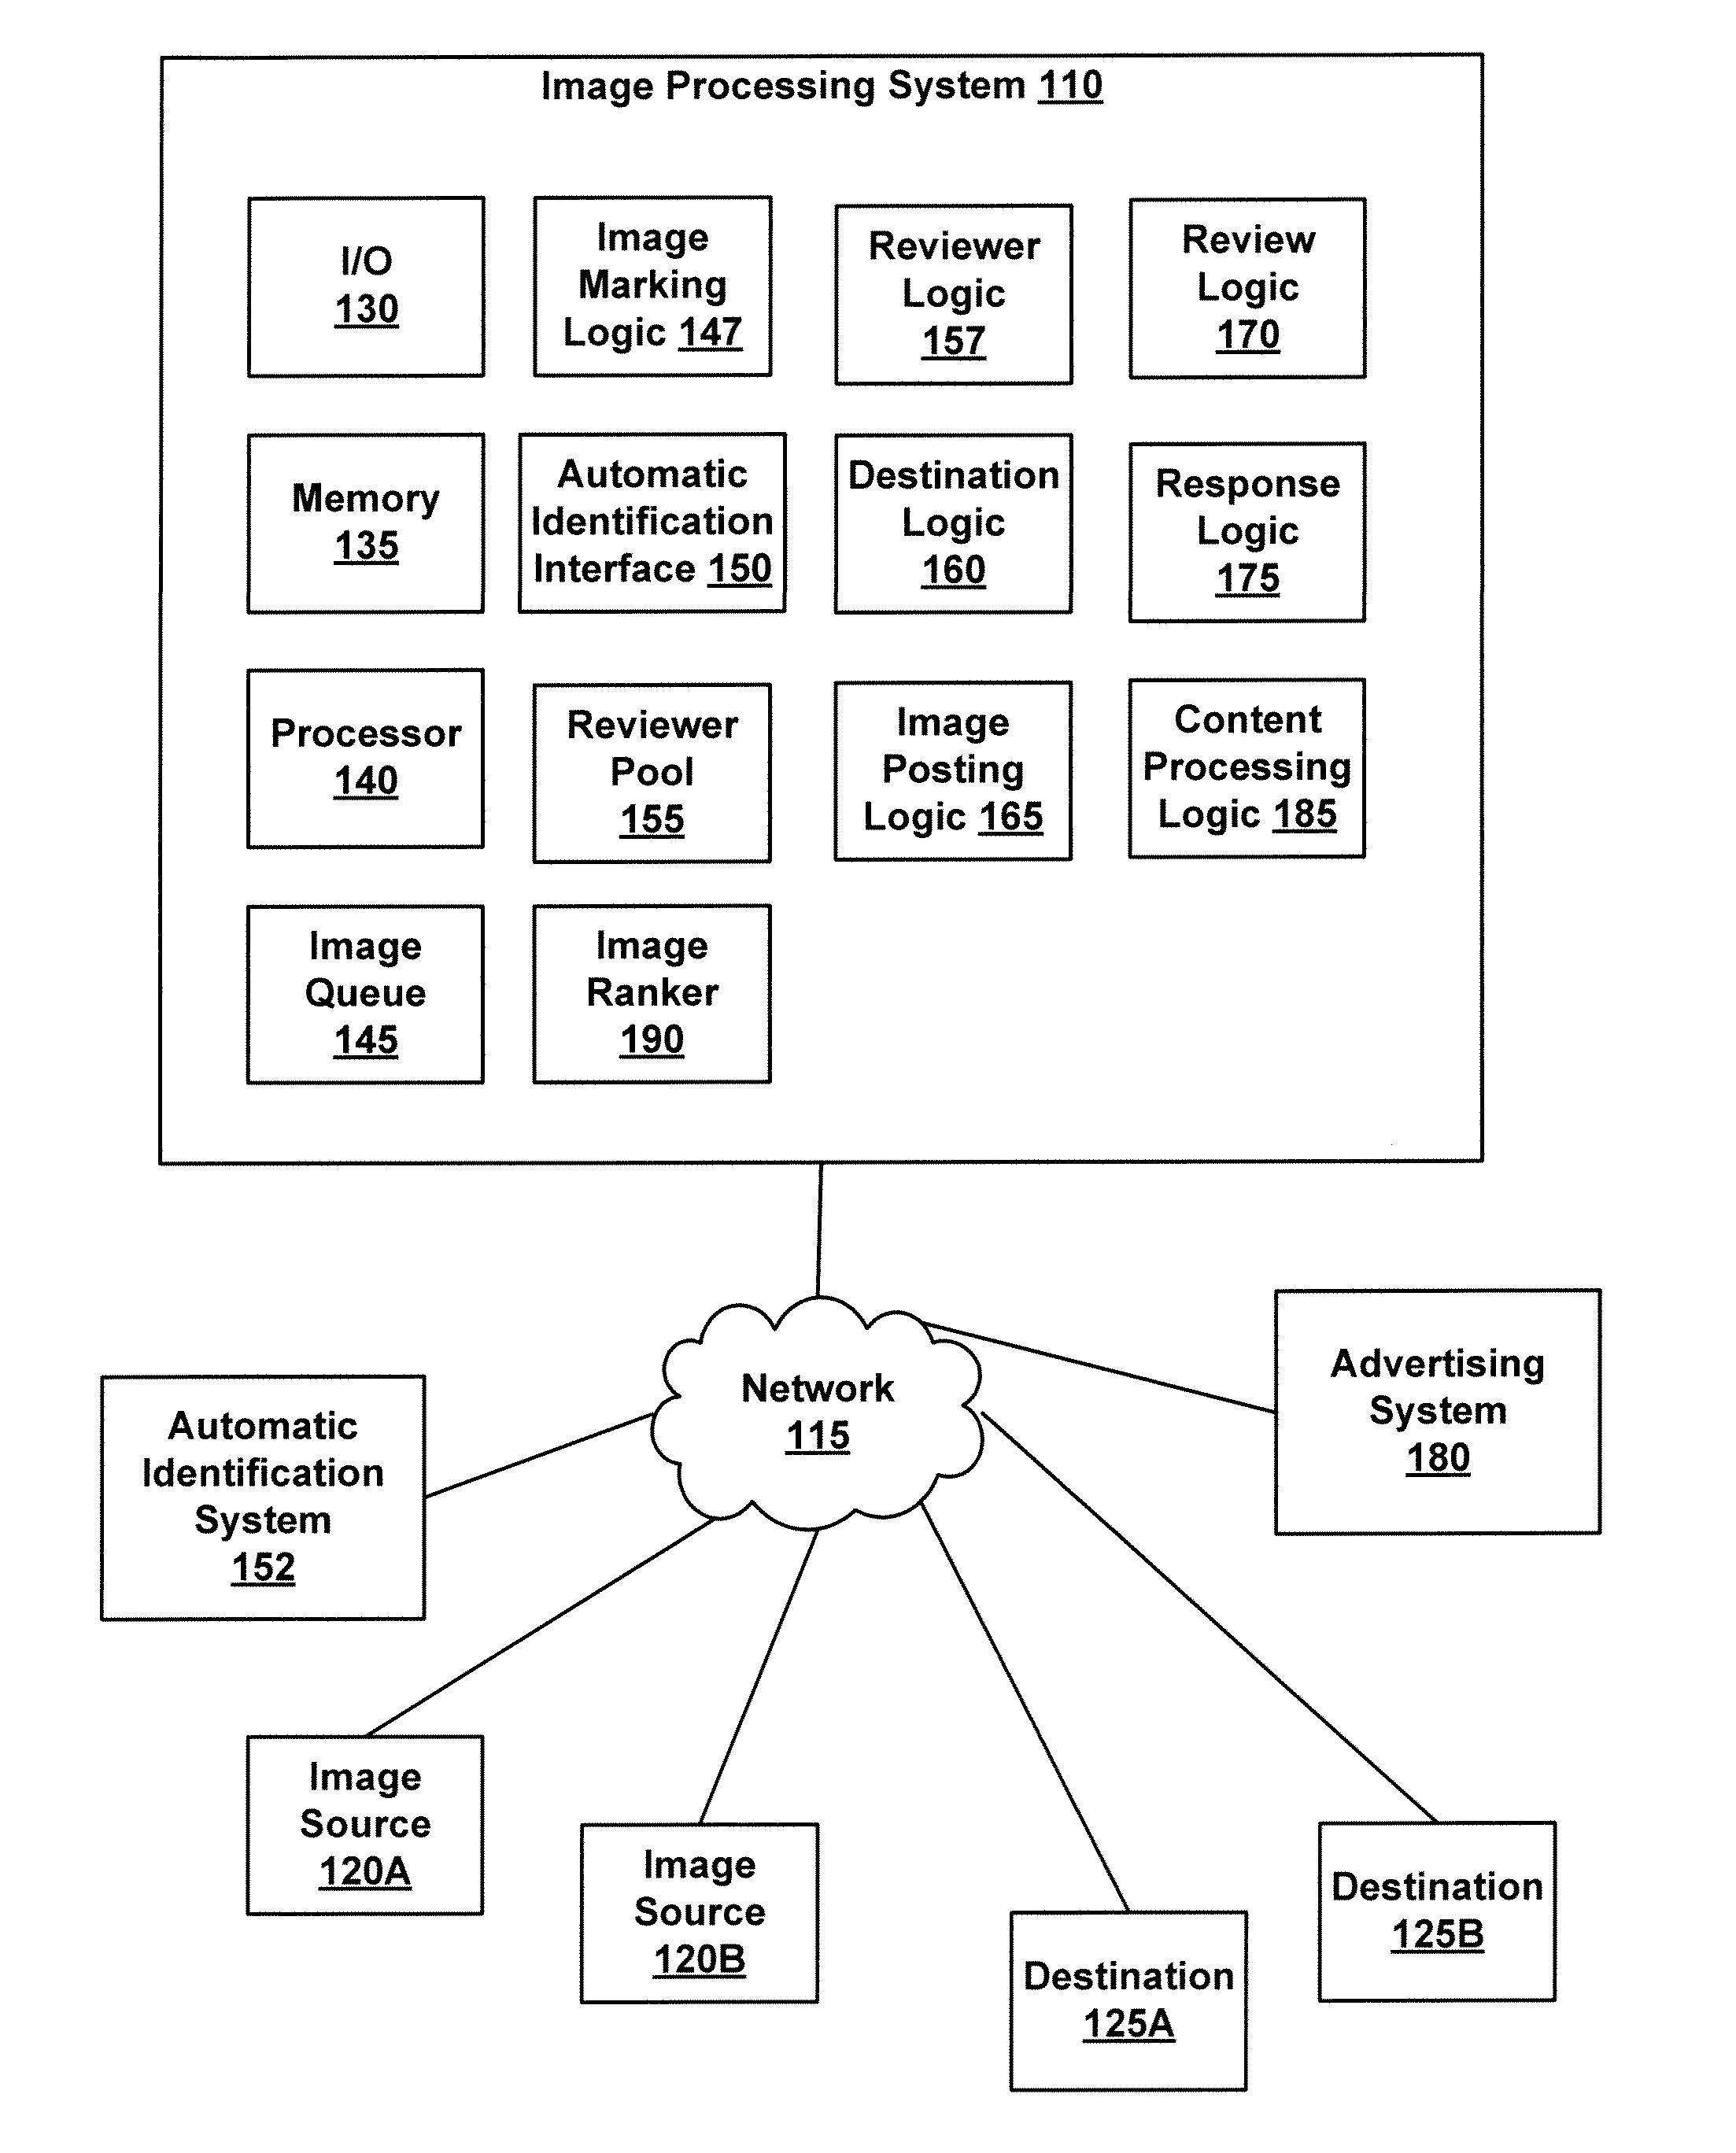 Image Tagging System